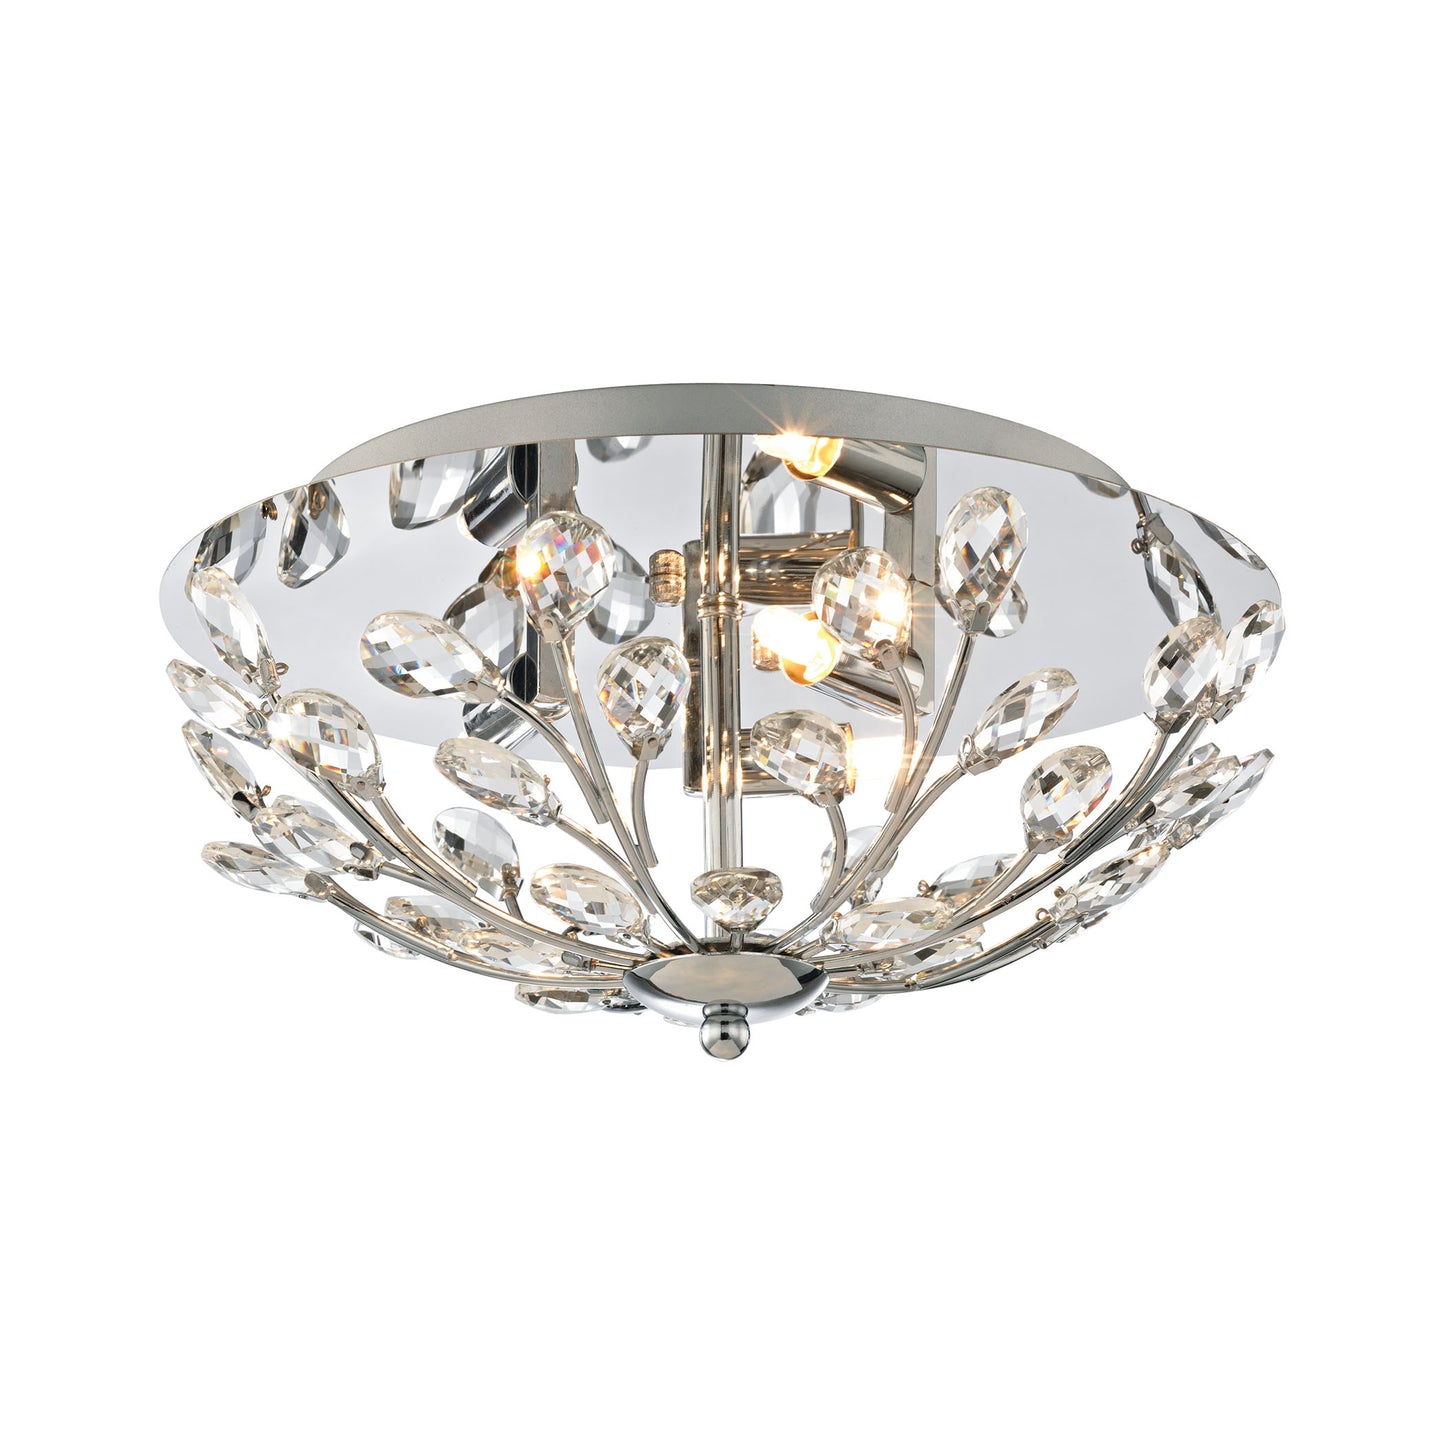 Crystique 3-Light Flush Mount in Polished Chrome with Branch Metalwork and Clear Crystal